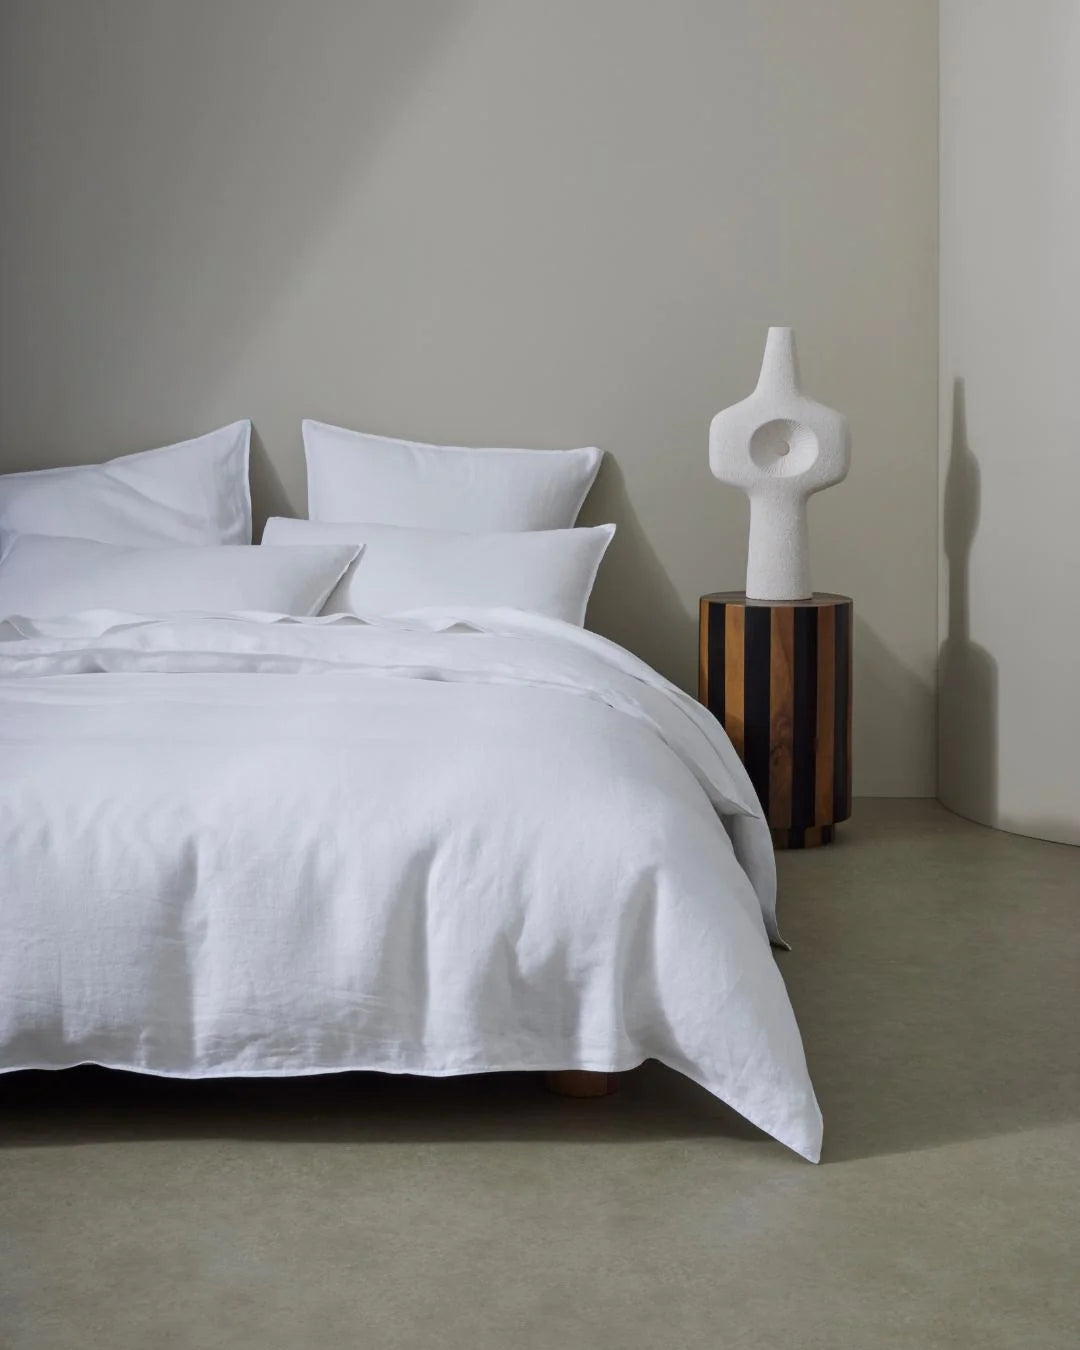 Crafted from the highest quality French Flax Linen, each product from the Ravello range is prewashed and aero finished for a unique and luxuriously soft, relaxed feel, making it a dream to rest and relax in.  The White colourway is a classic, essential shade that will match with any look and create timeless styles.